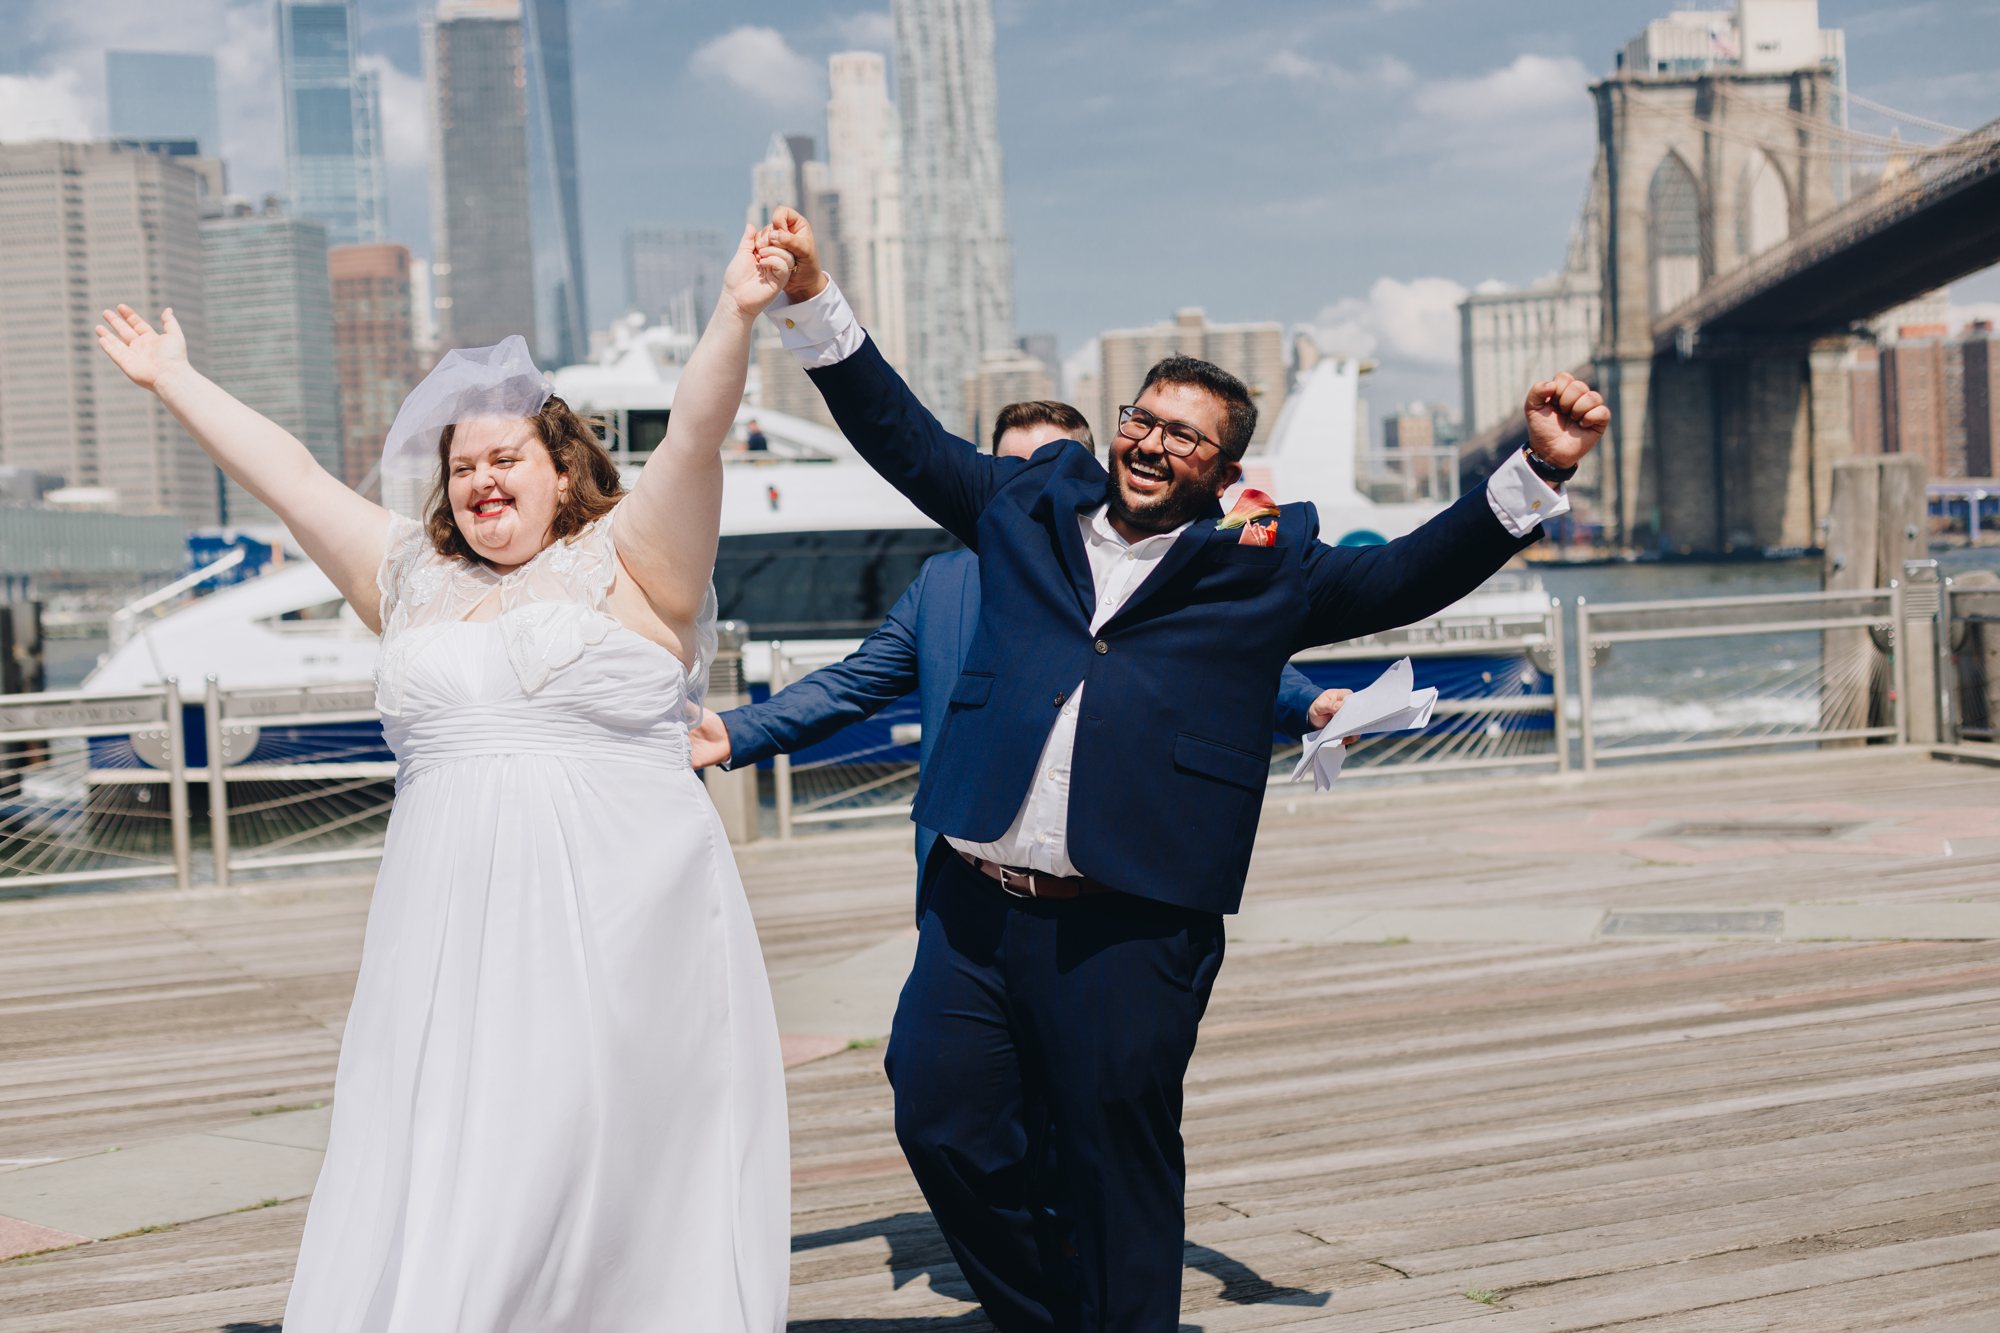 Fun candid elopement ceremony photos in Dumbo Brooklyn